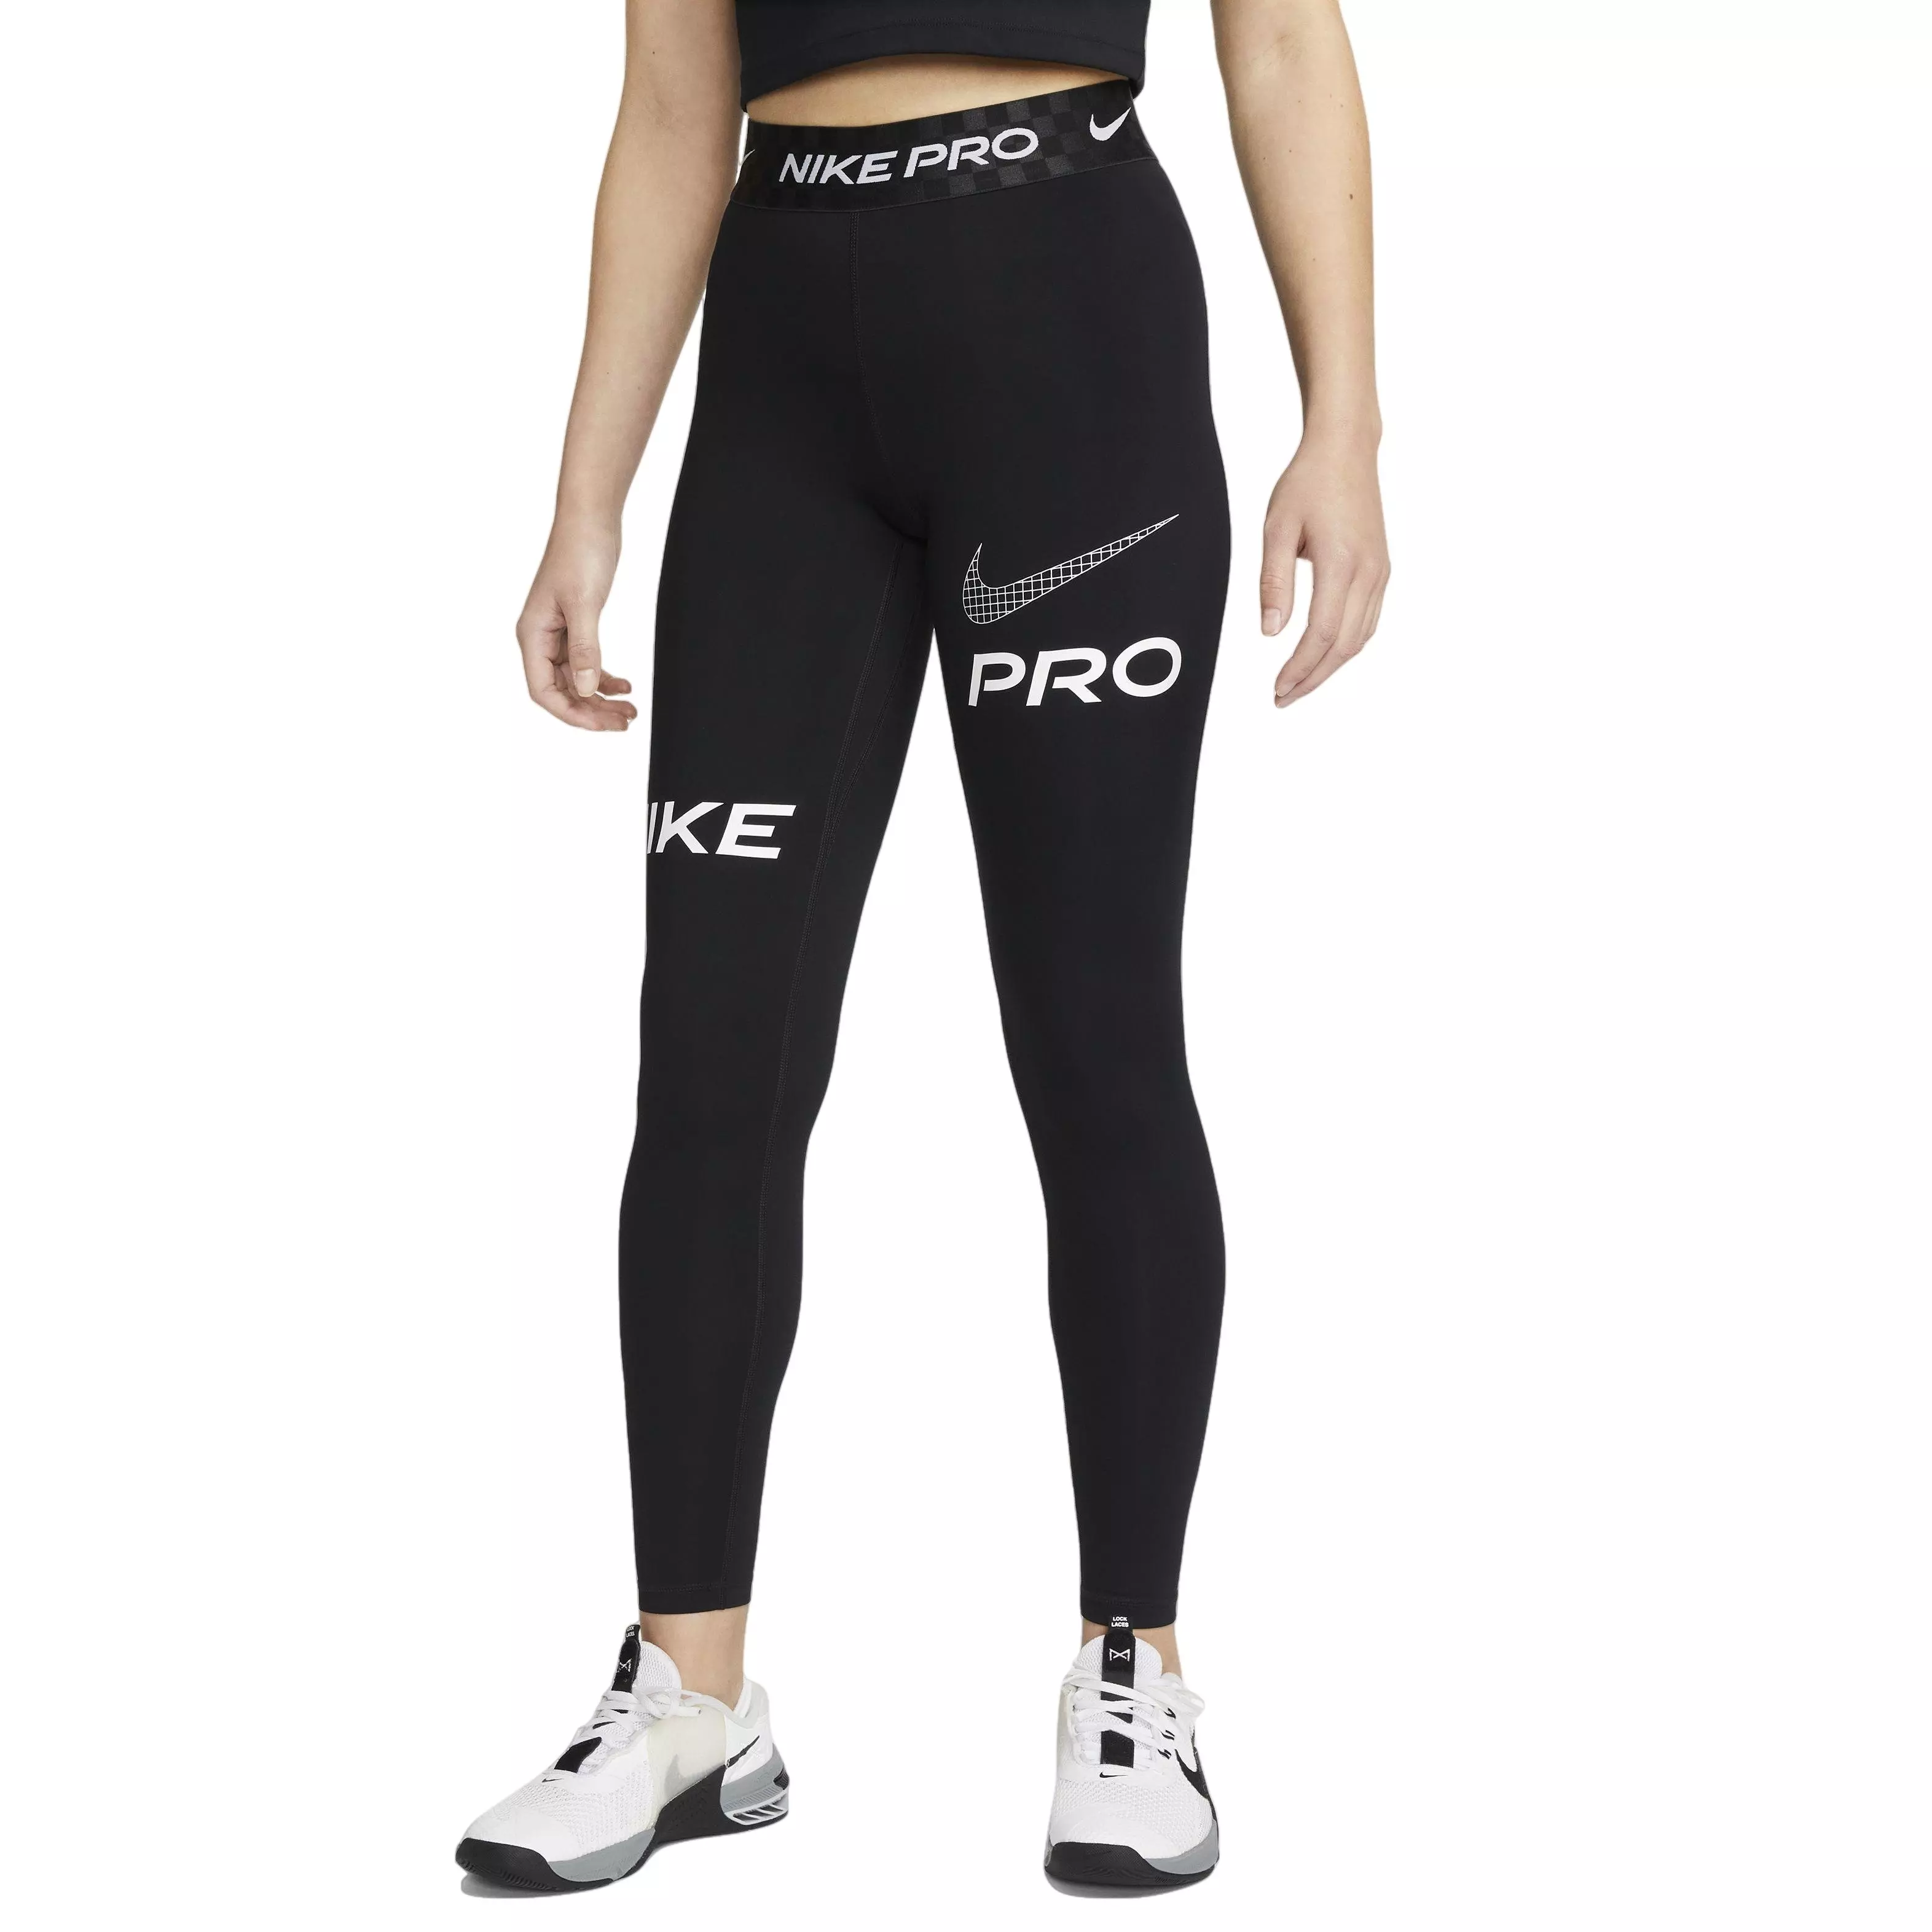 NIKE PRO DRI FIT GRAPHIC TRAINING GYM TIGHTS TANK SET OUTFIT